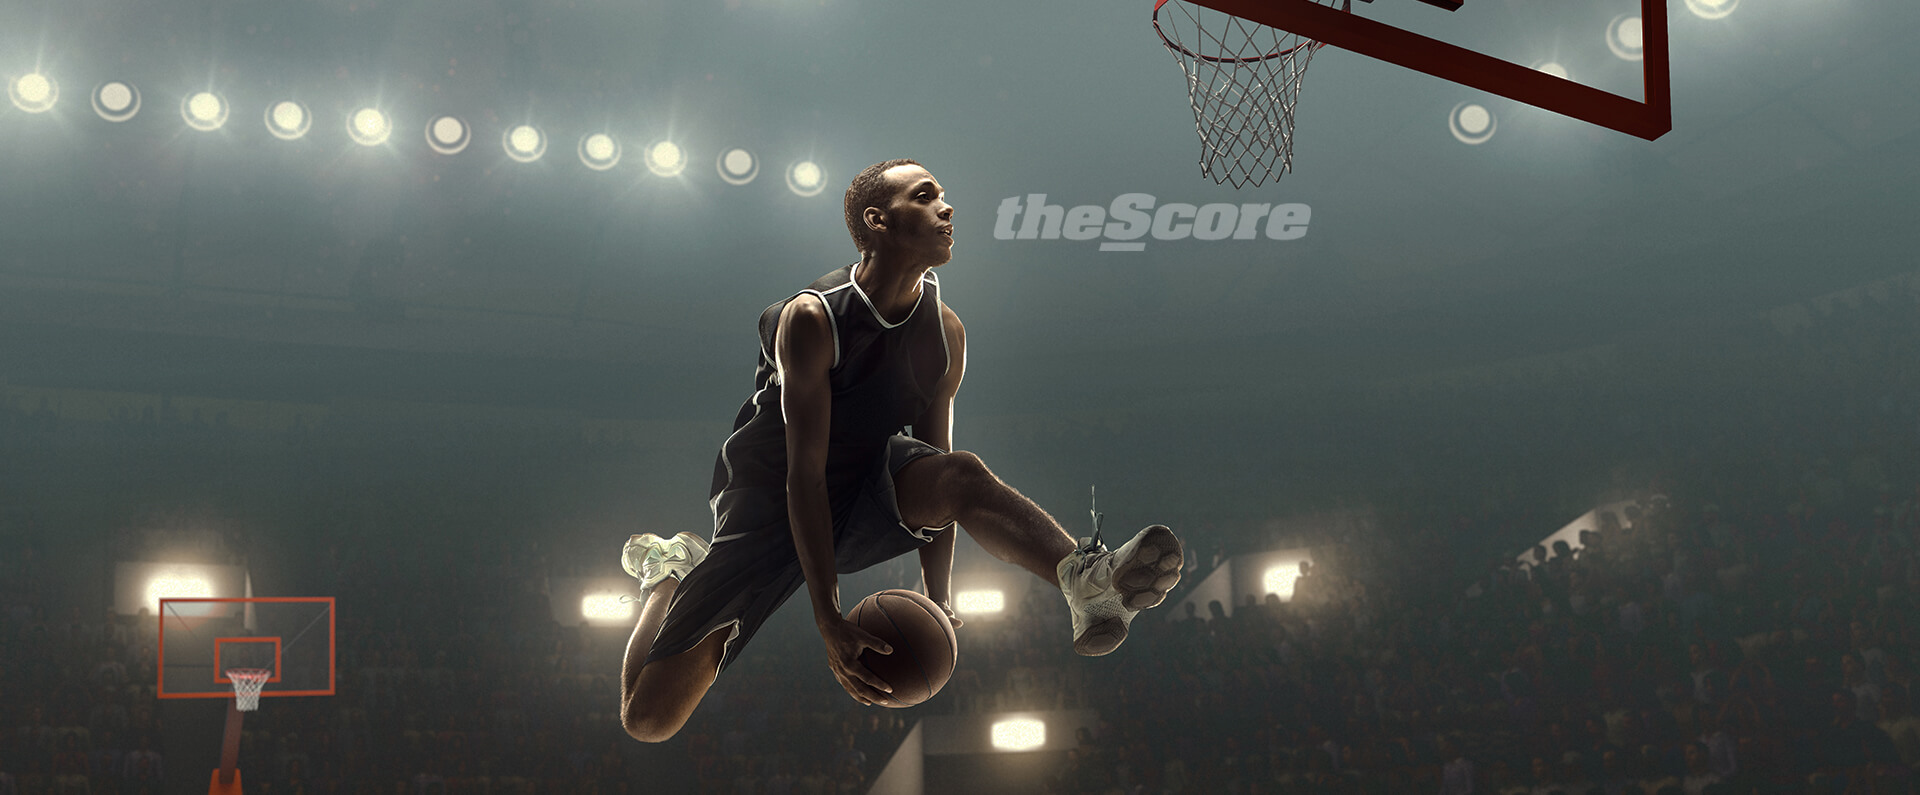 The Score - Basketball player